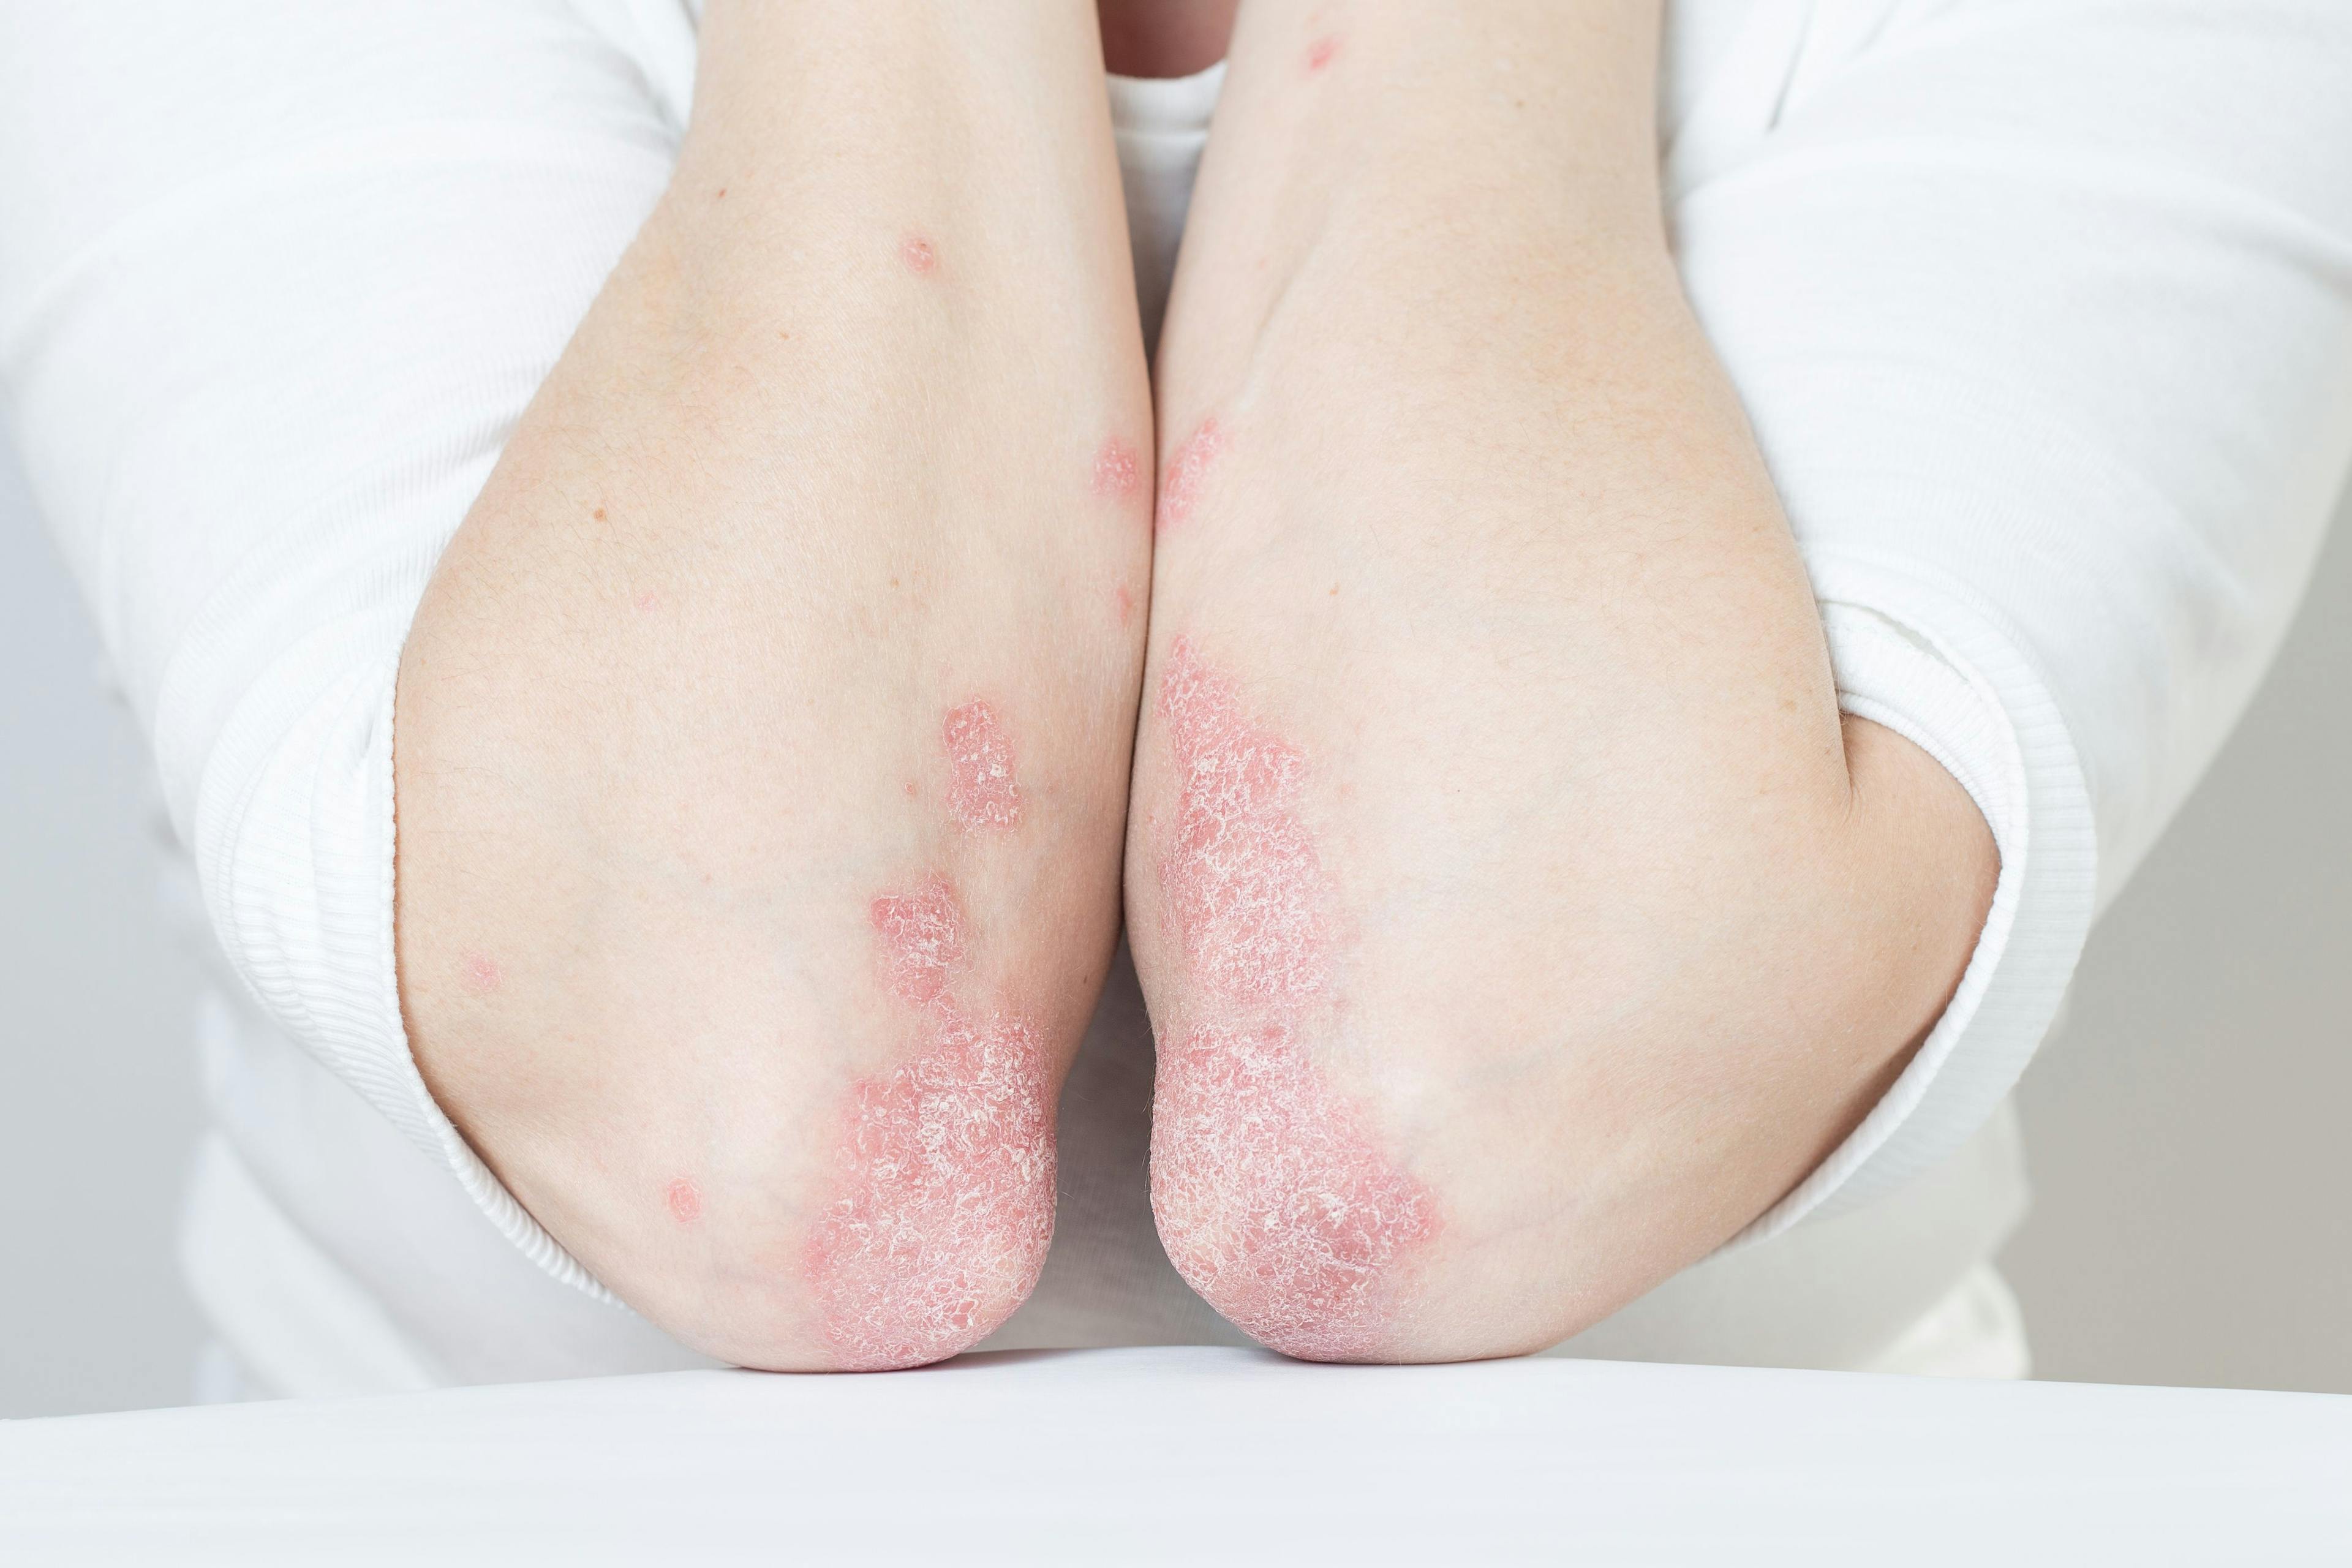 Risankizumab Met Co-Primary Endpoints in Patients With Moderate Plaque Psoriasis